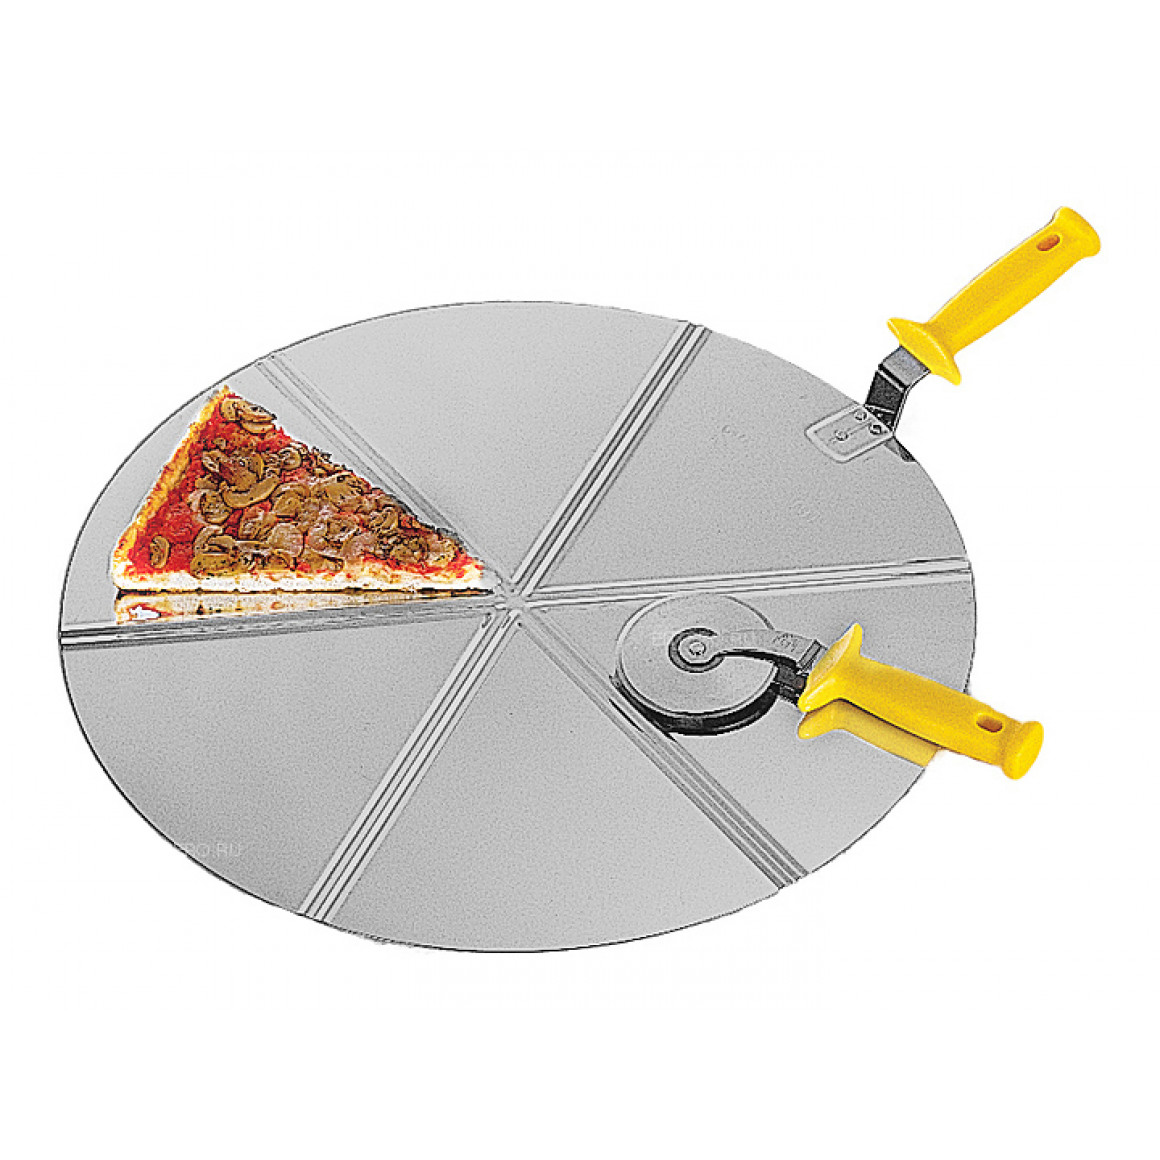 Pizza tray with raised handle